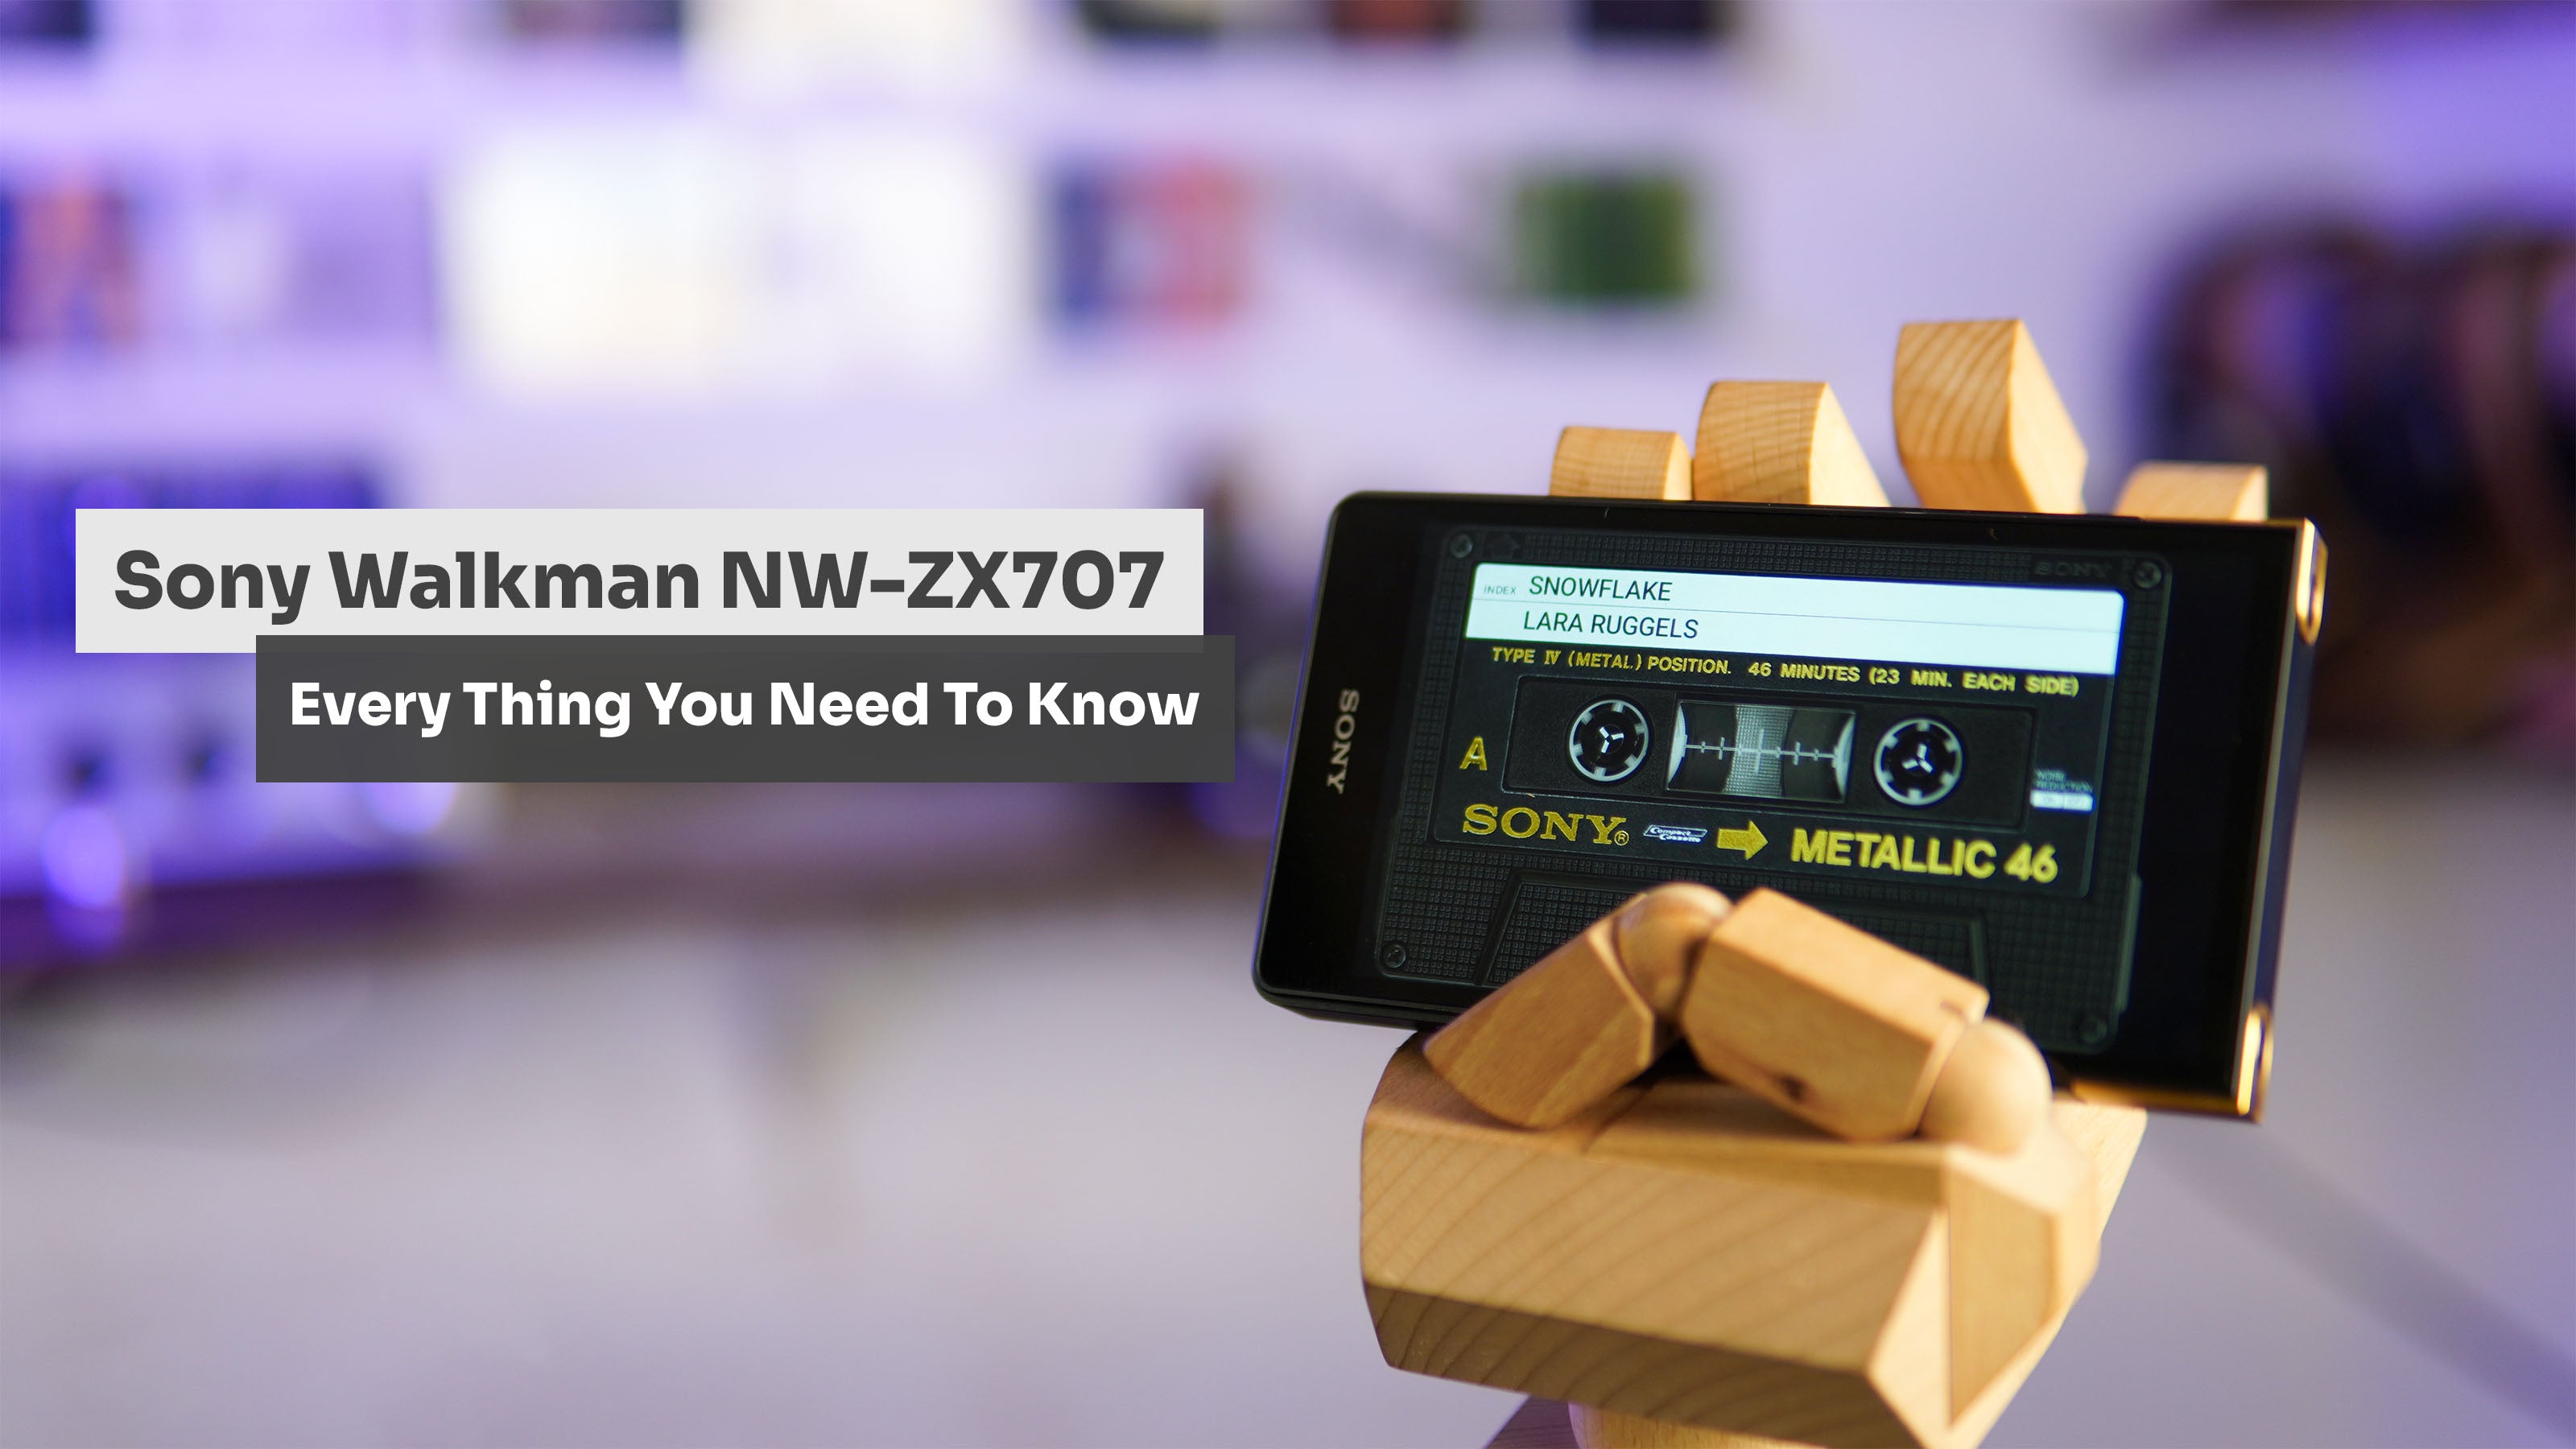 Everything You Need To Know About The Sony - NW-ZX707 Walkman